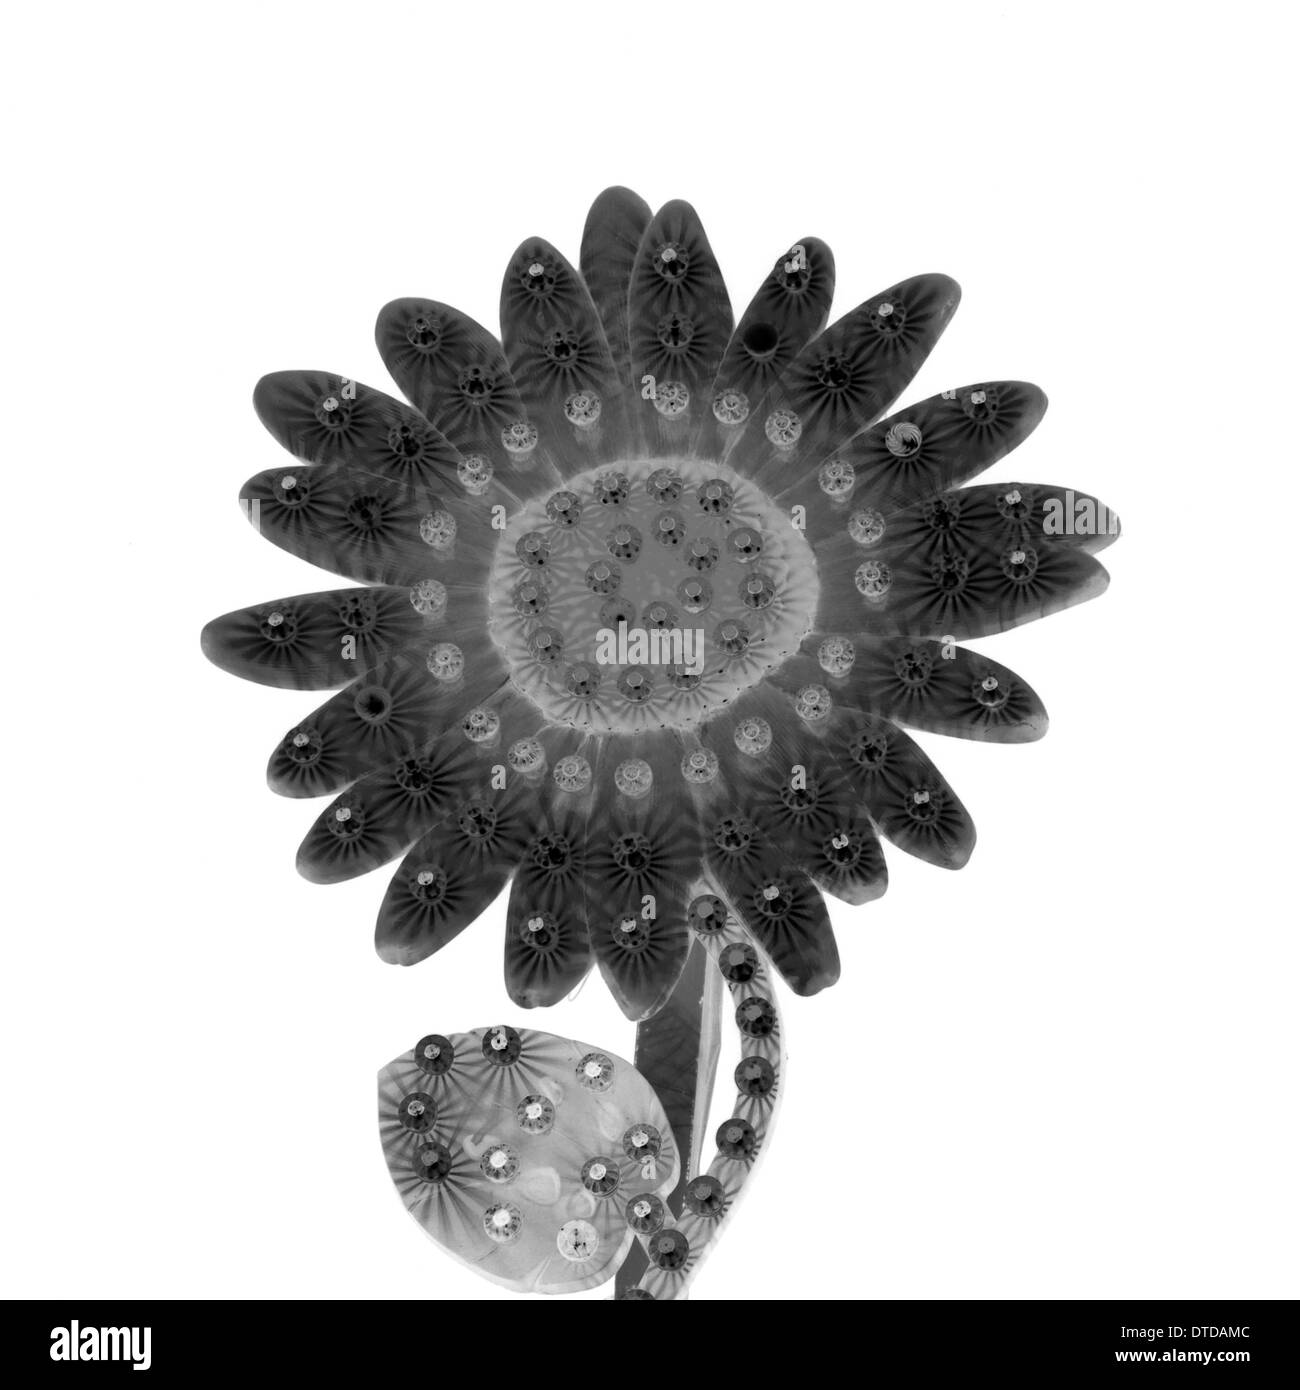 Electric sideshow daisy flower display with flashing lights. Black and white. Stock Photo